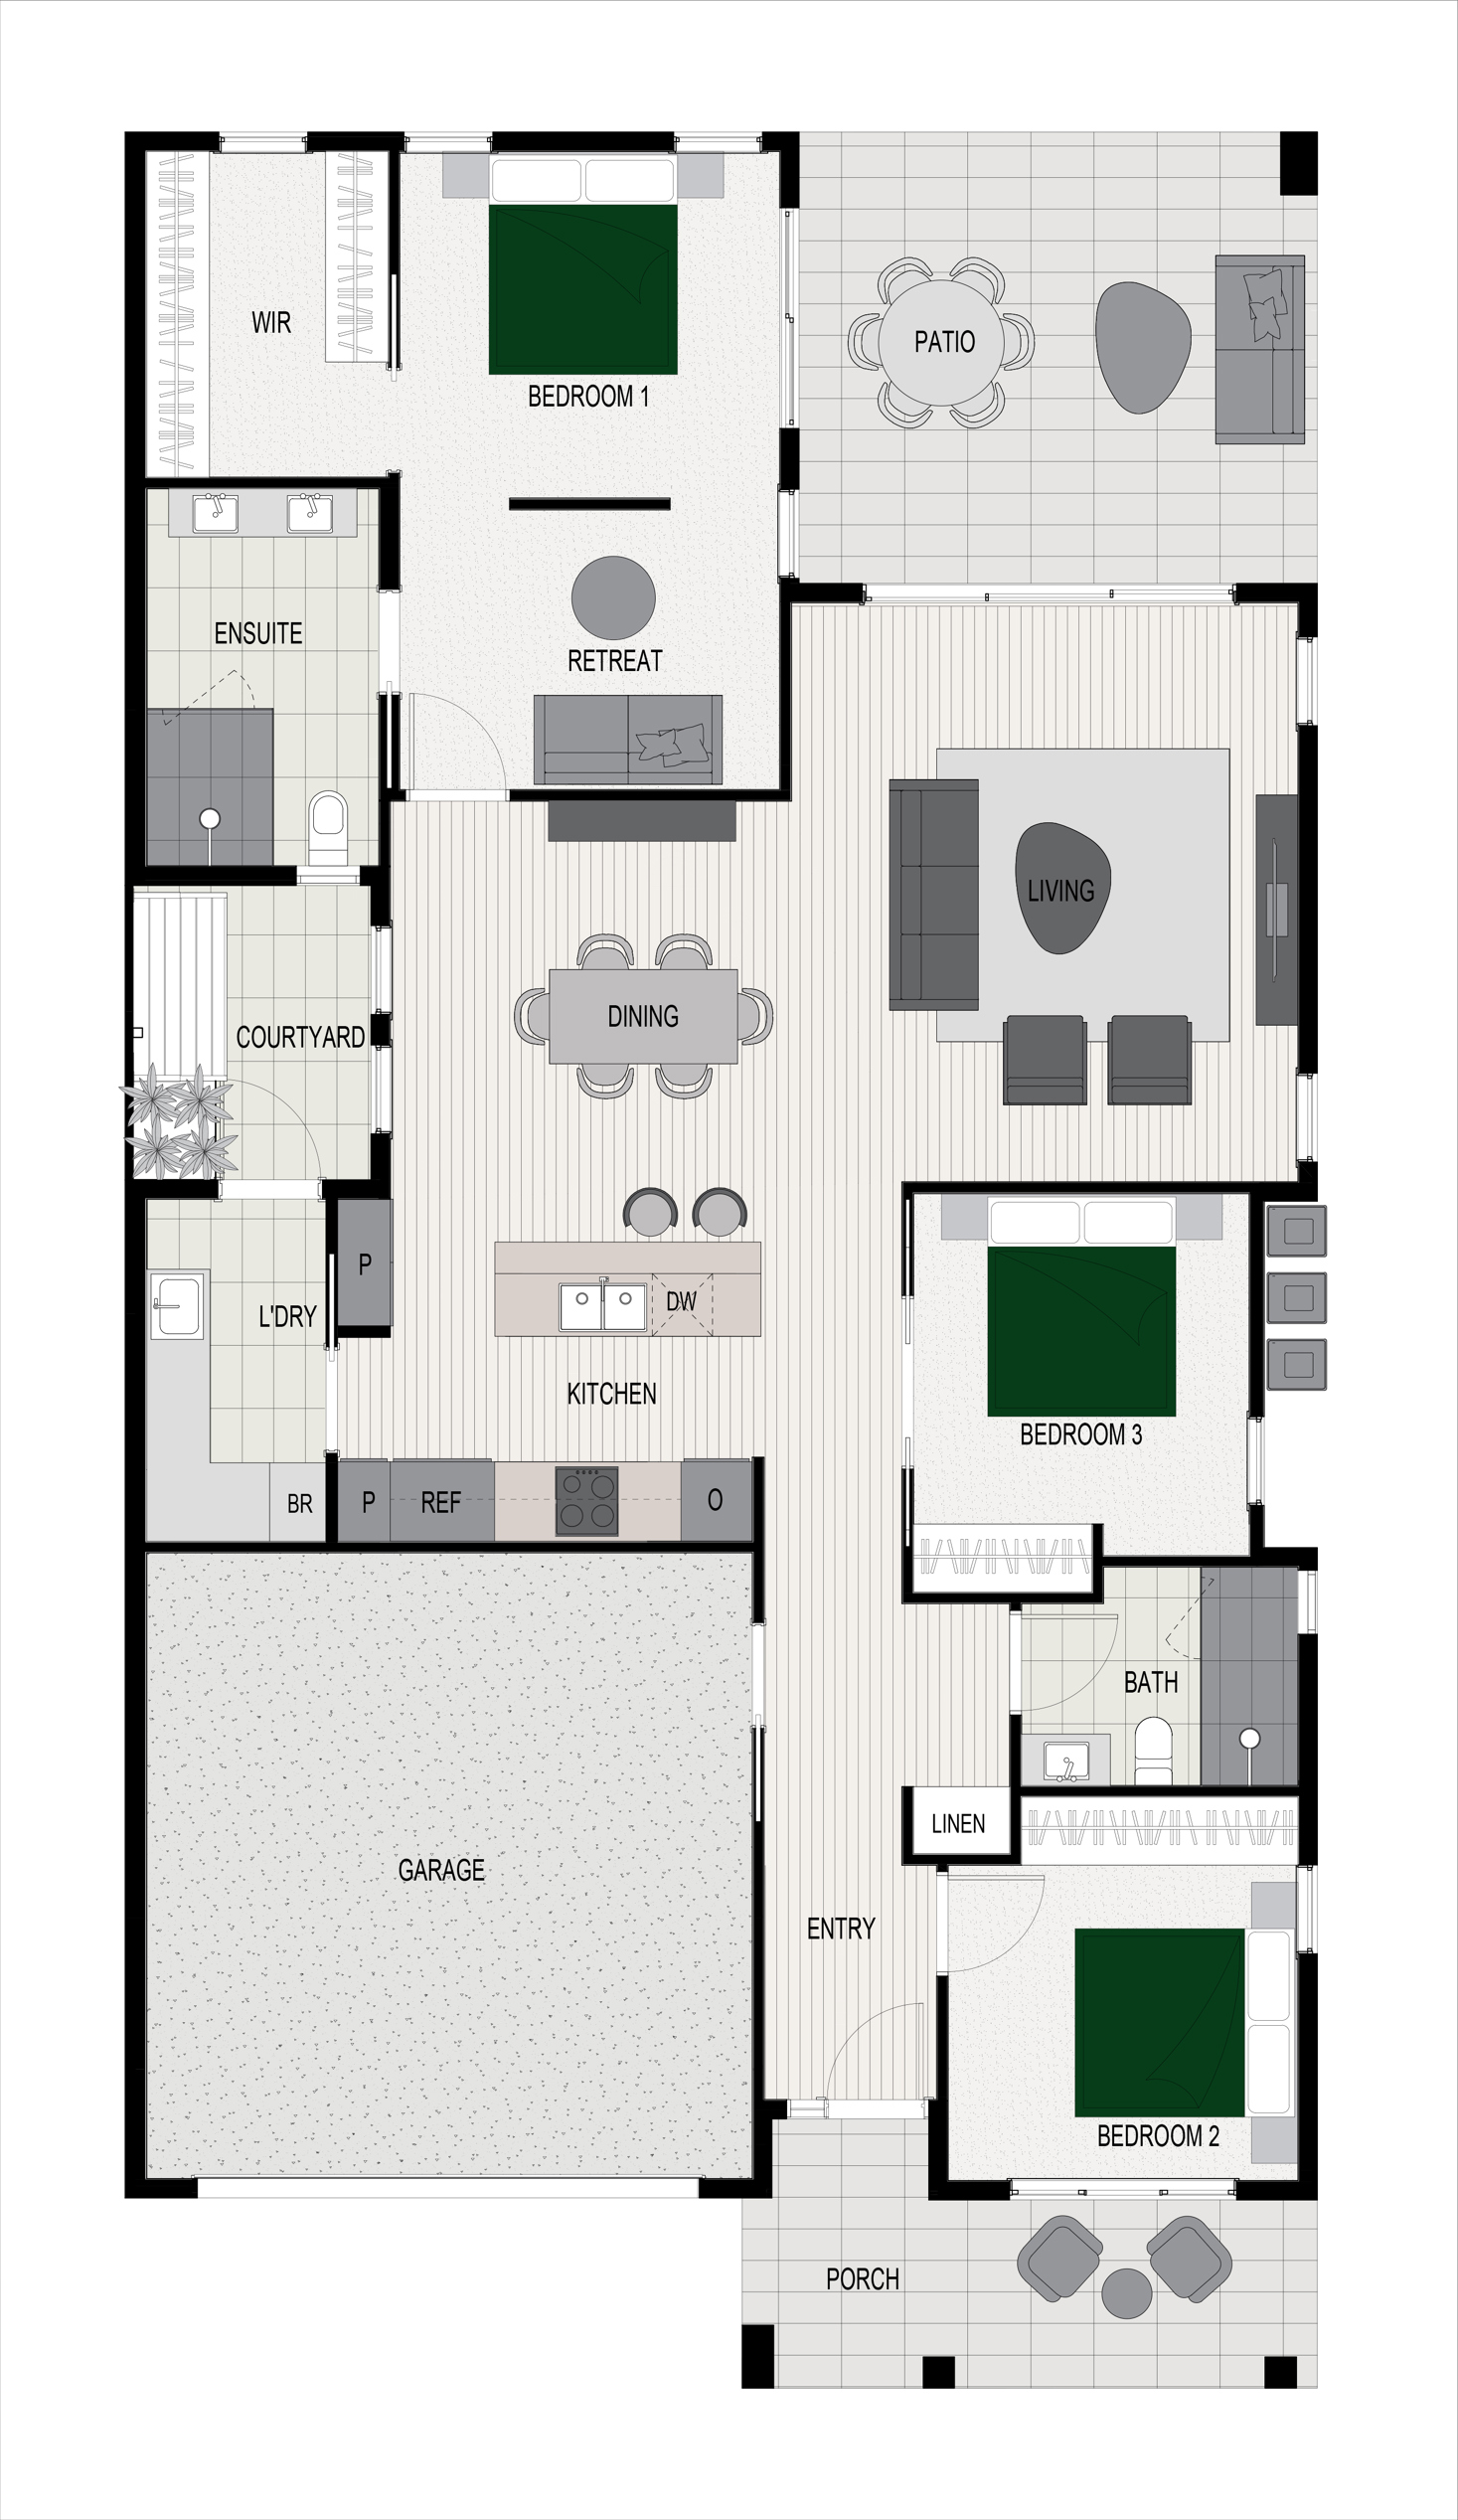 Floorplan of the Yarra H3 house design, located at Stockland Halcyon Gables in The Hills district.